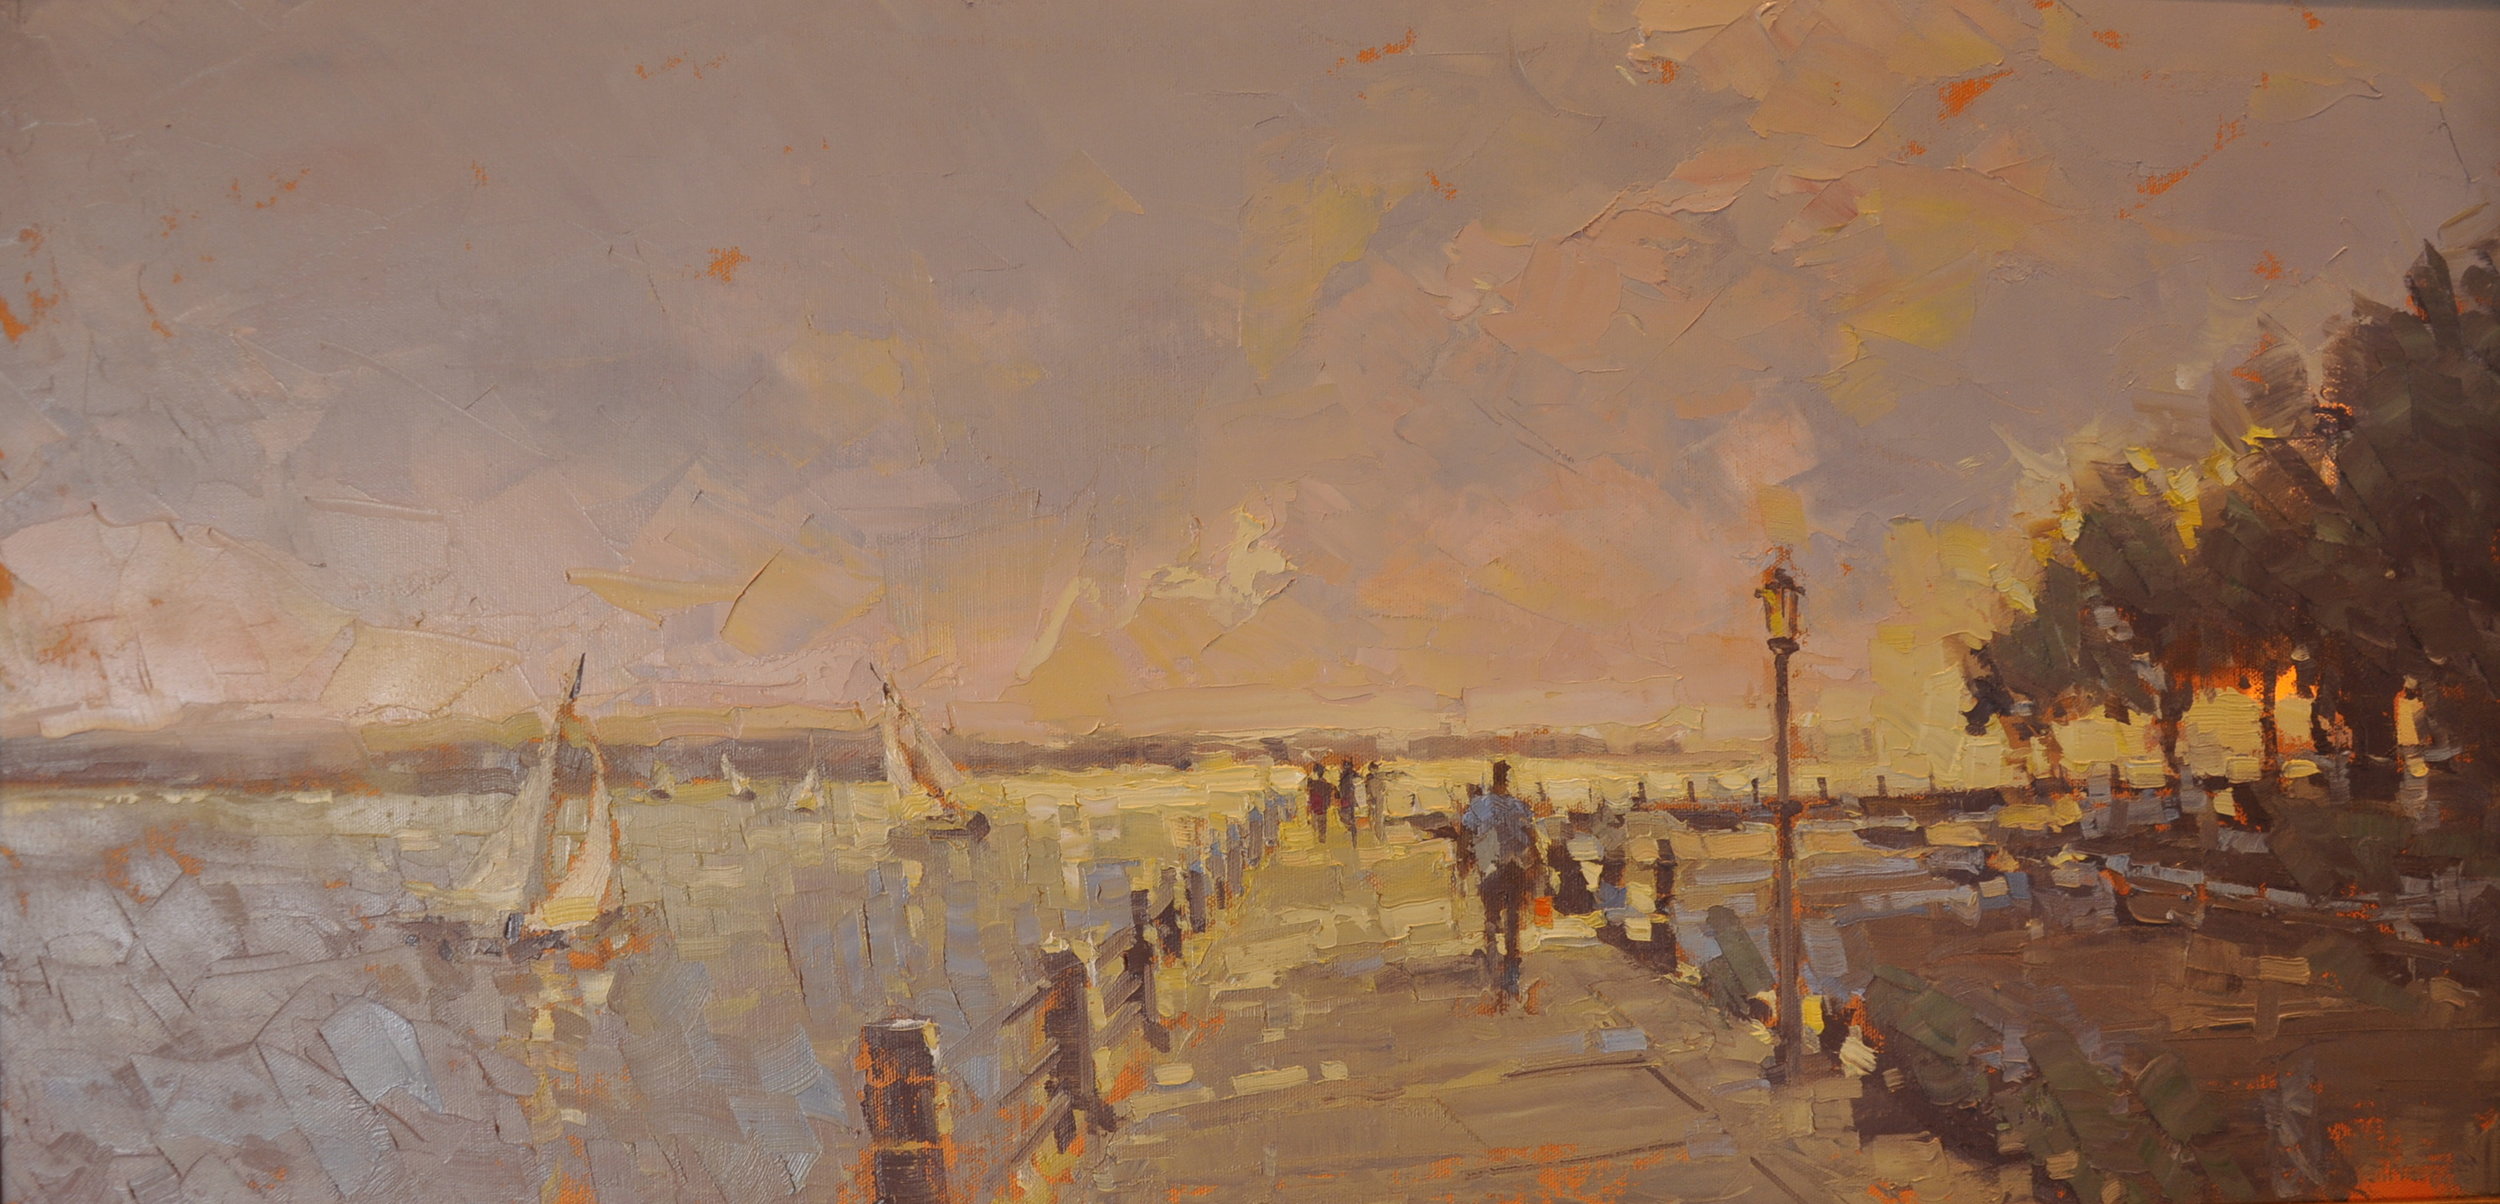 windy day on the battery, 15x30, oil on canvas, 4000.00, weber.JPG